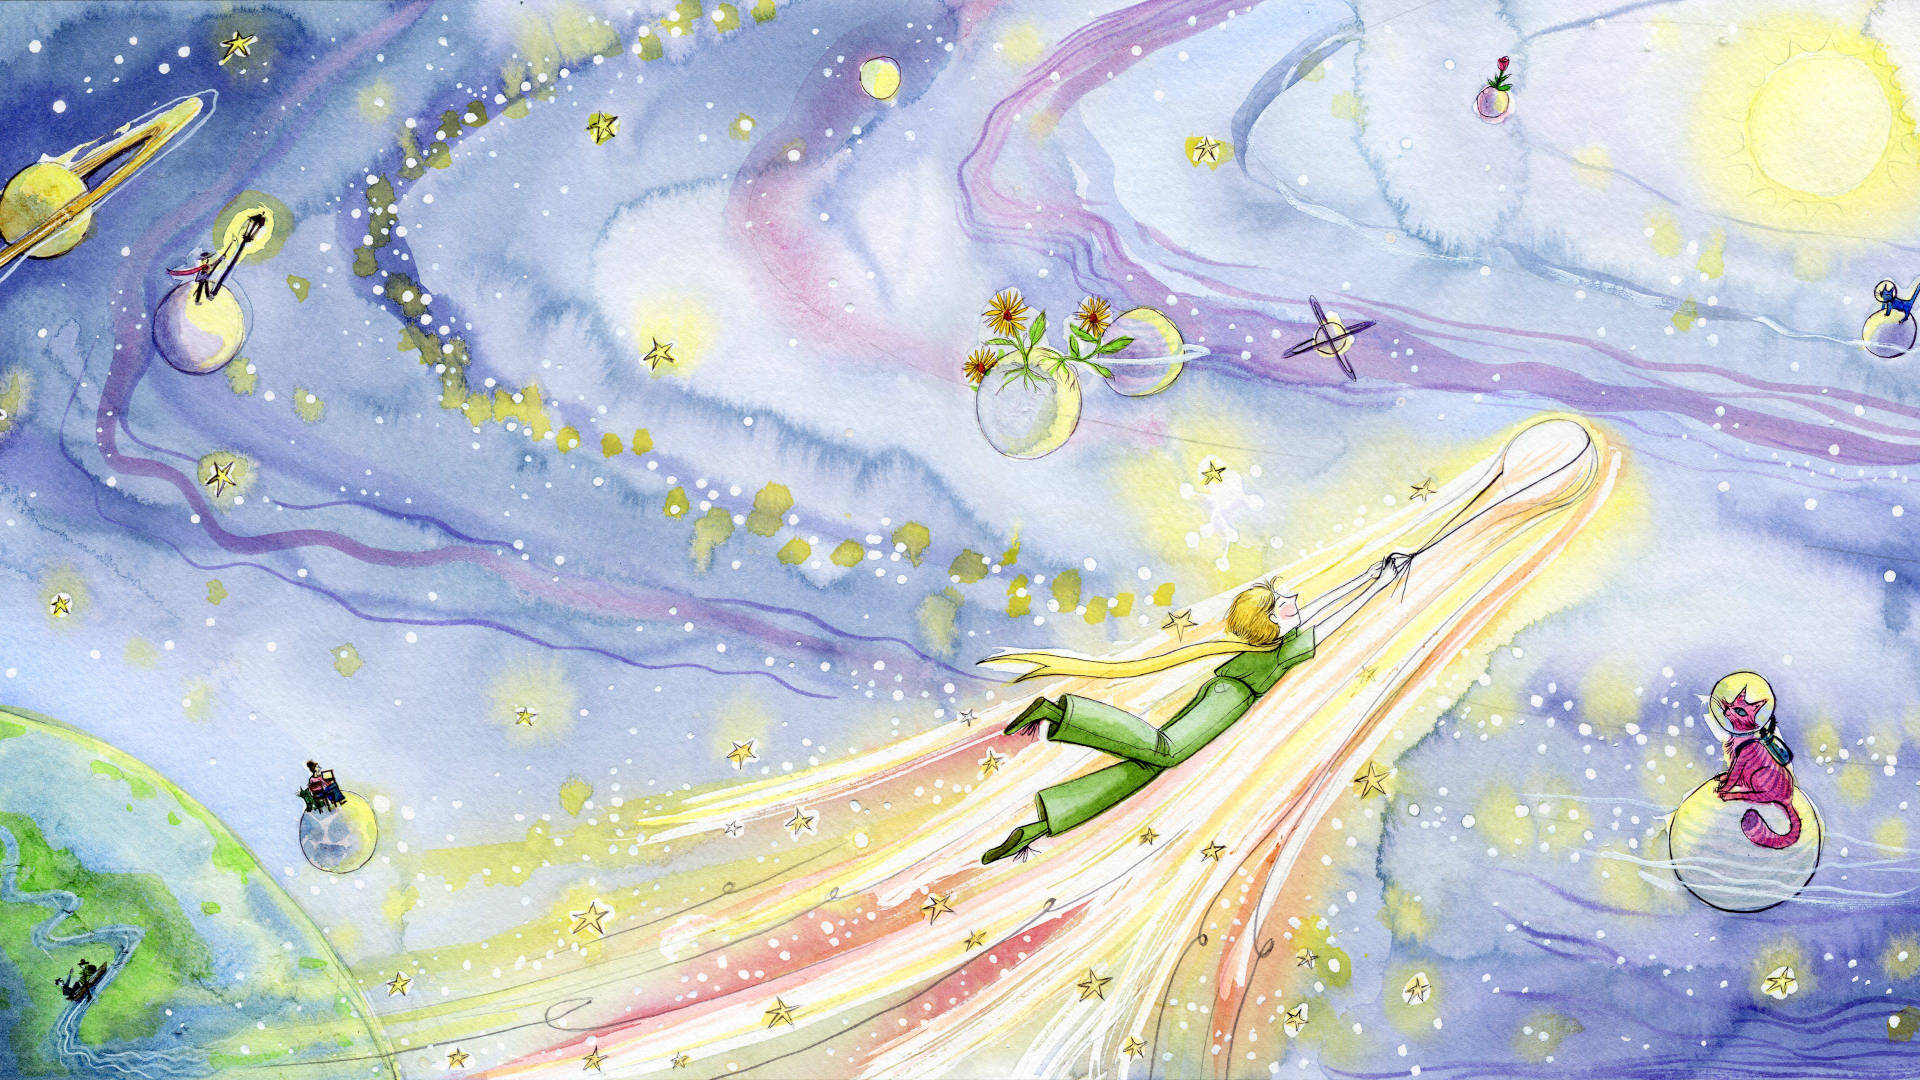 Illustation of the Little Prince flying through space with a comet he has captured.